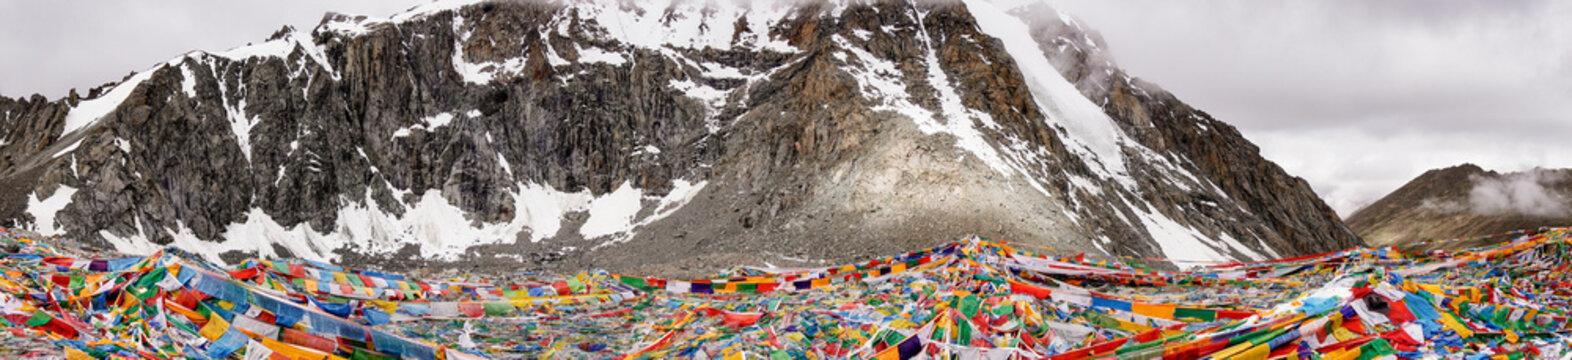 Drolma La Pass on altitude 5650 meters above sea level is the highest point of the ritual route around the Sacred Mount Kailash in Western Tibet.